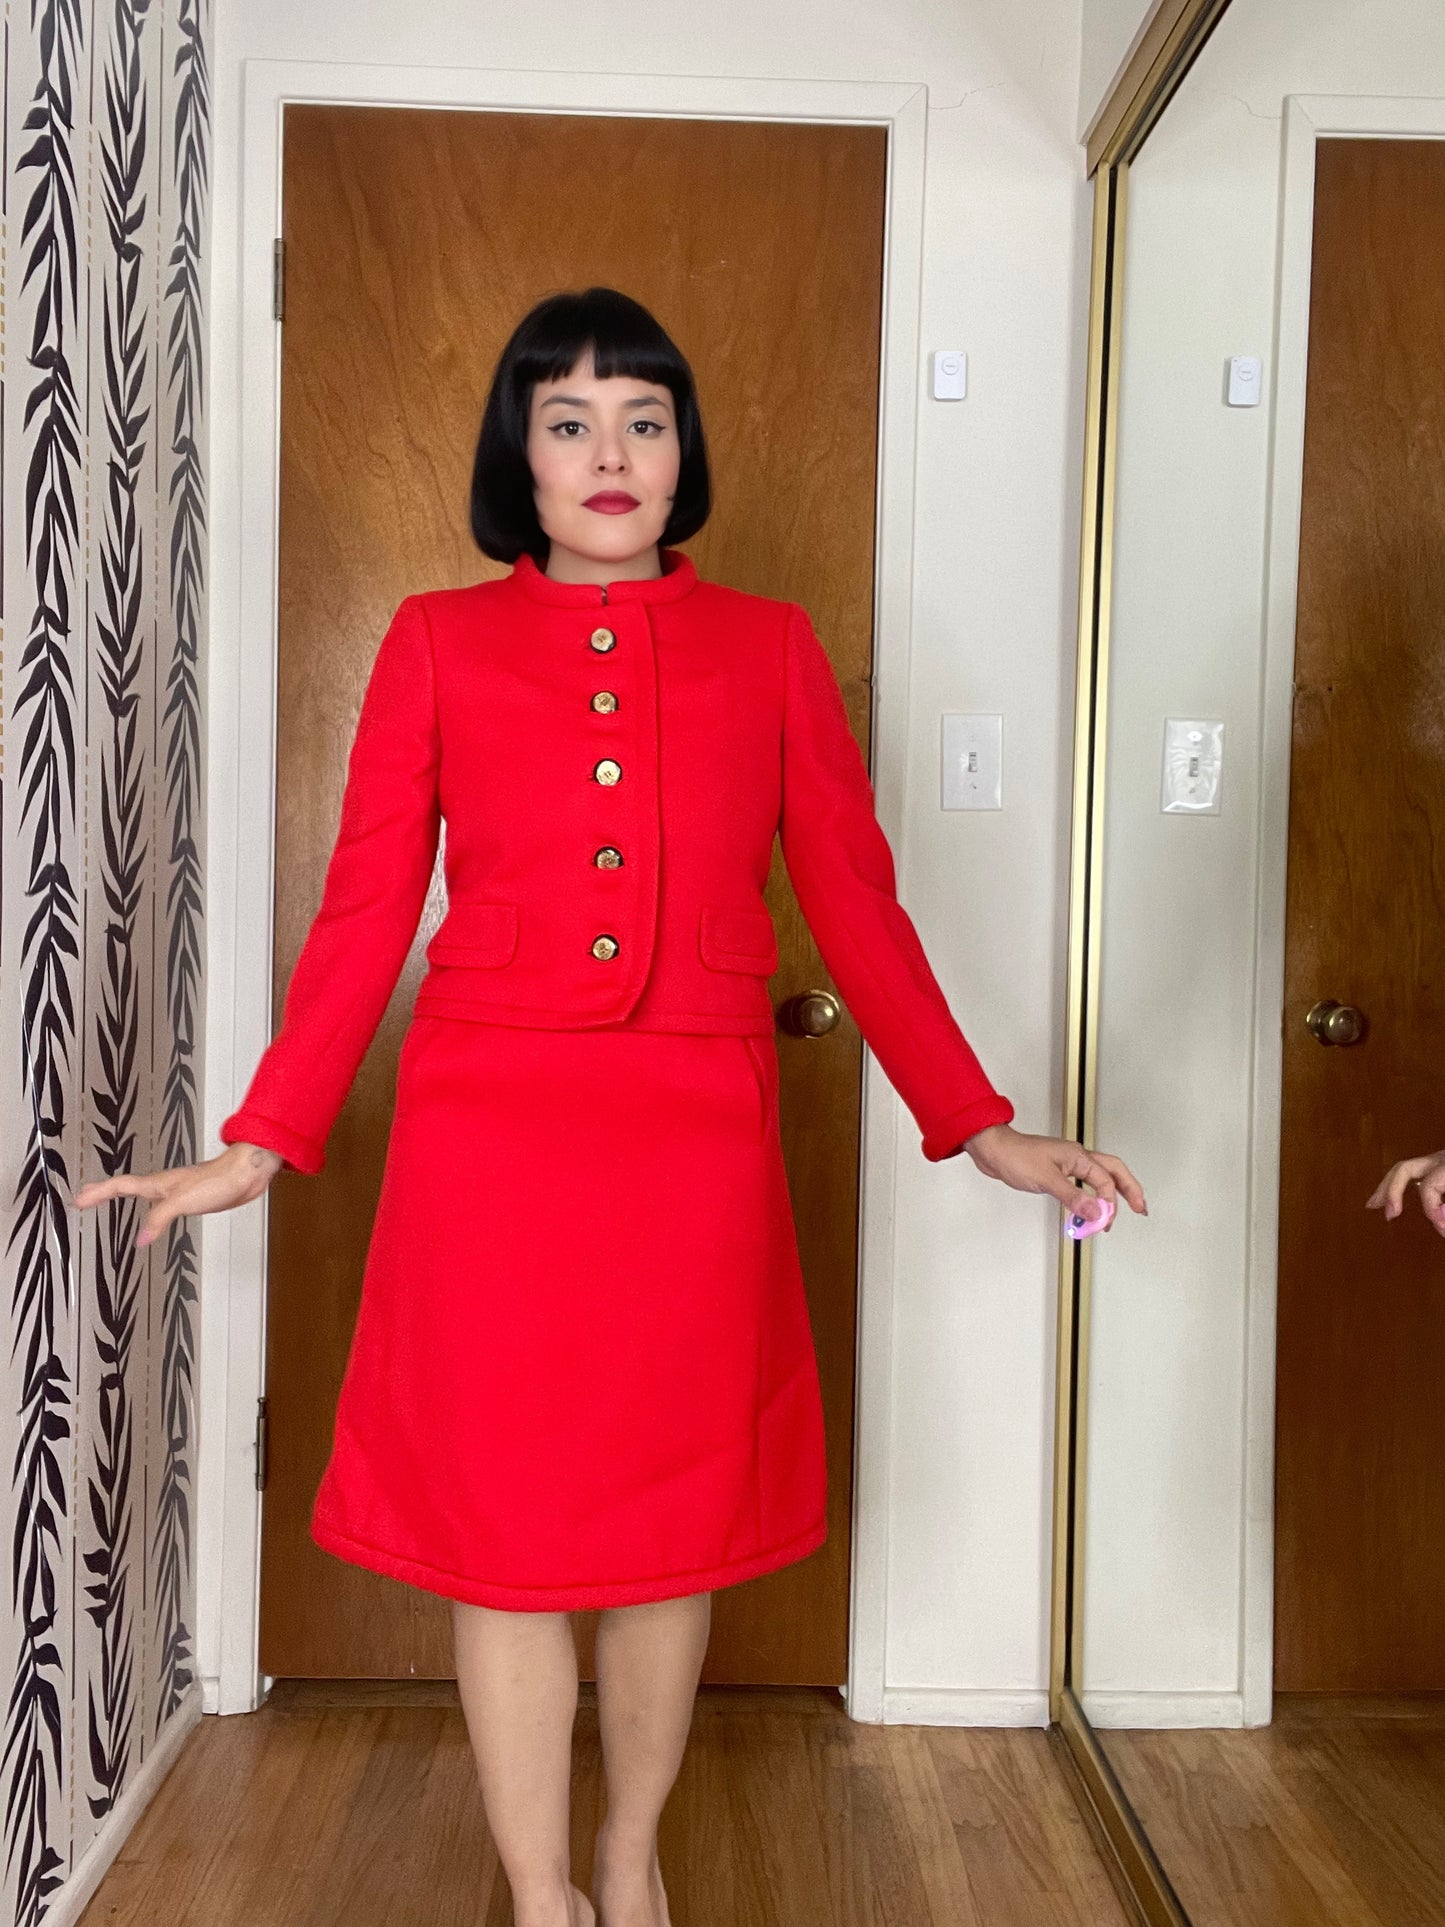 Vintage #60s Mod SpaceAge Lipstick Red Matching Dress with Blazer fits sizes XS-SM